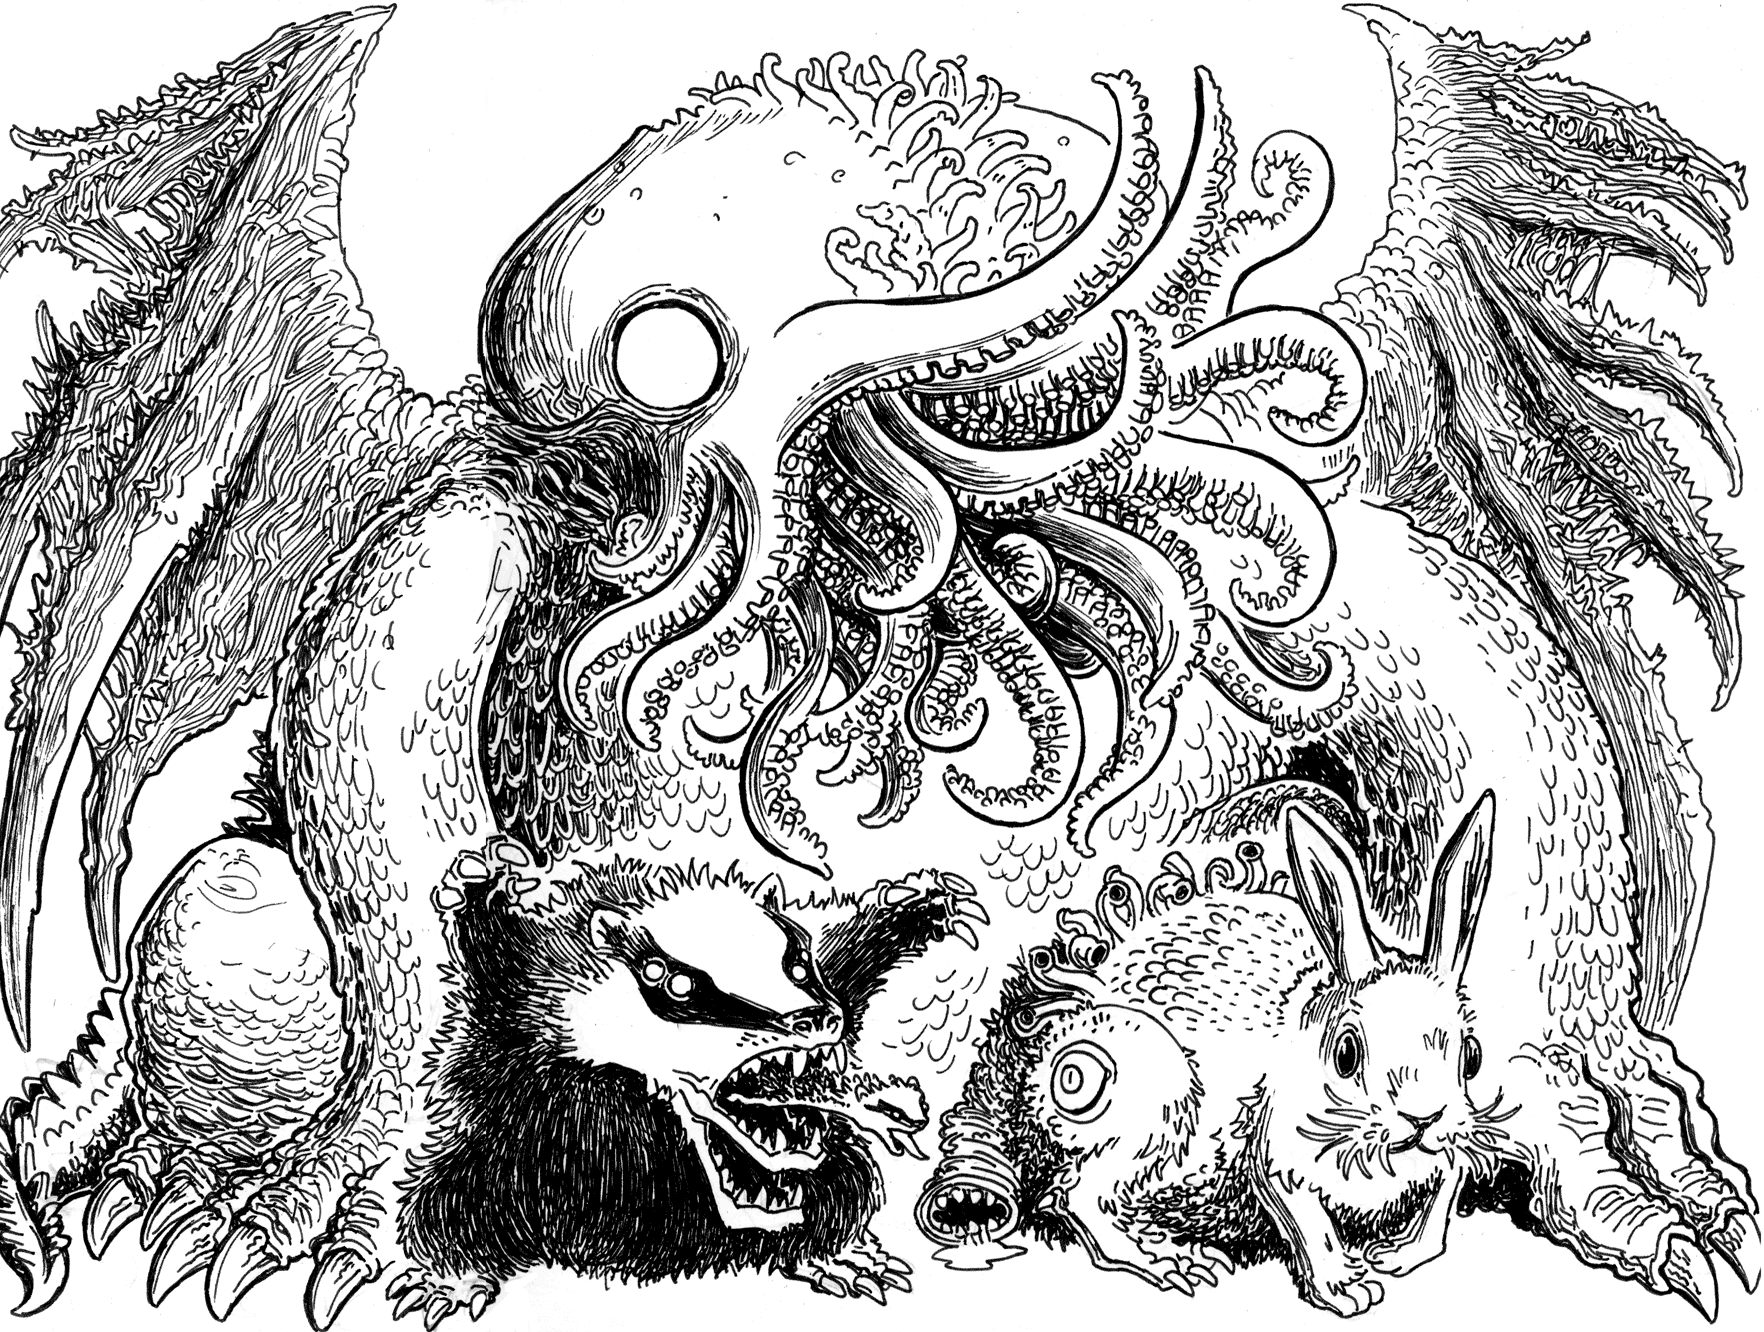 Lovecraft Sketch MWF: Cthulhu and Pets. 